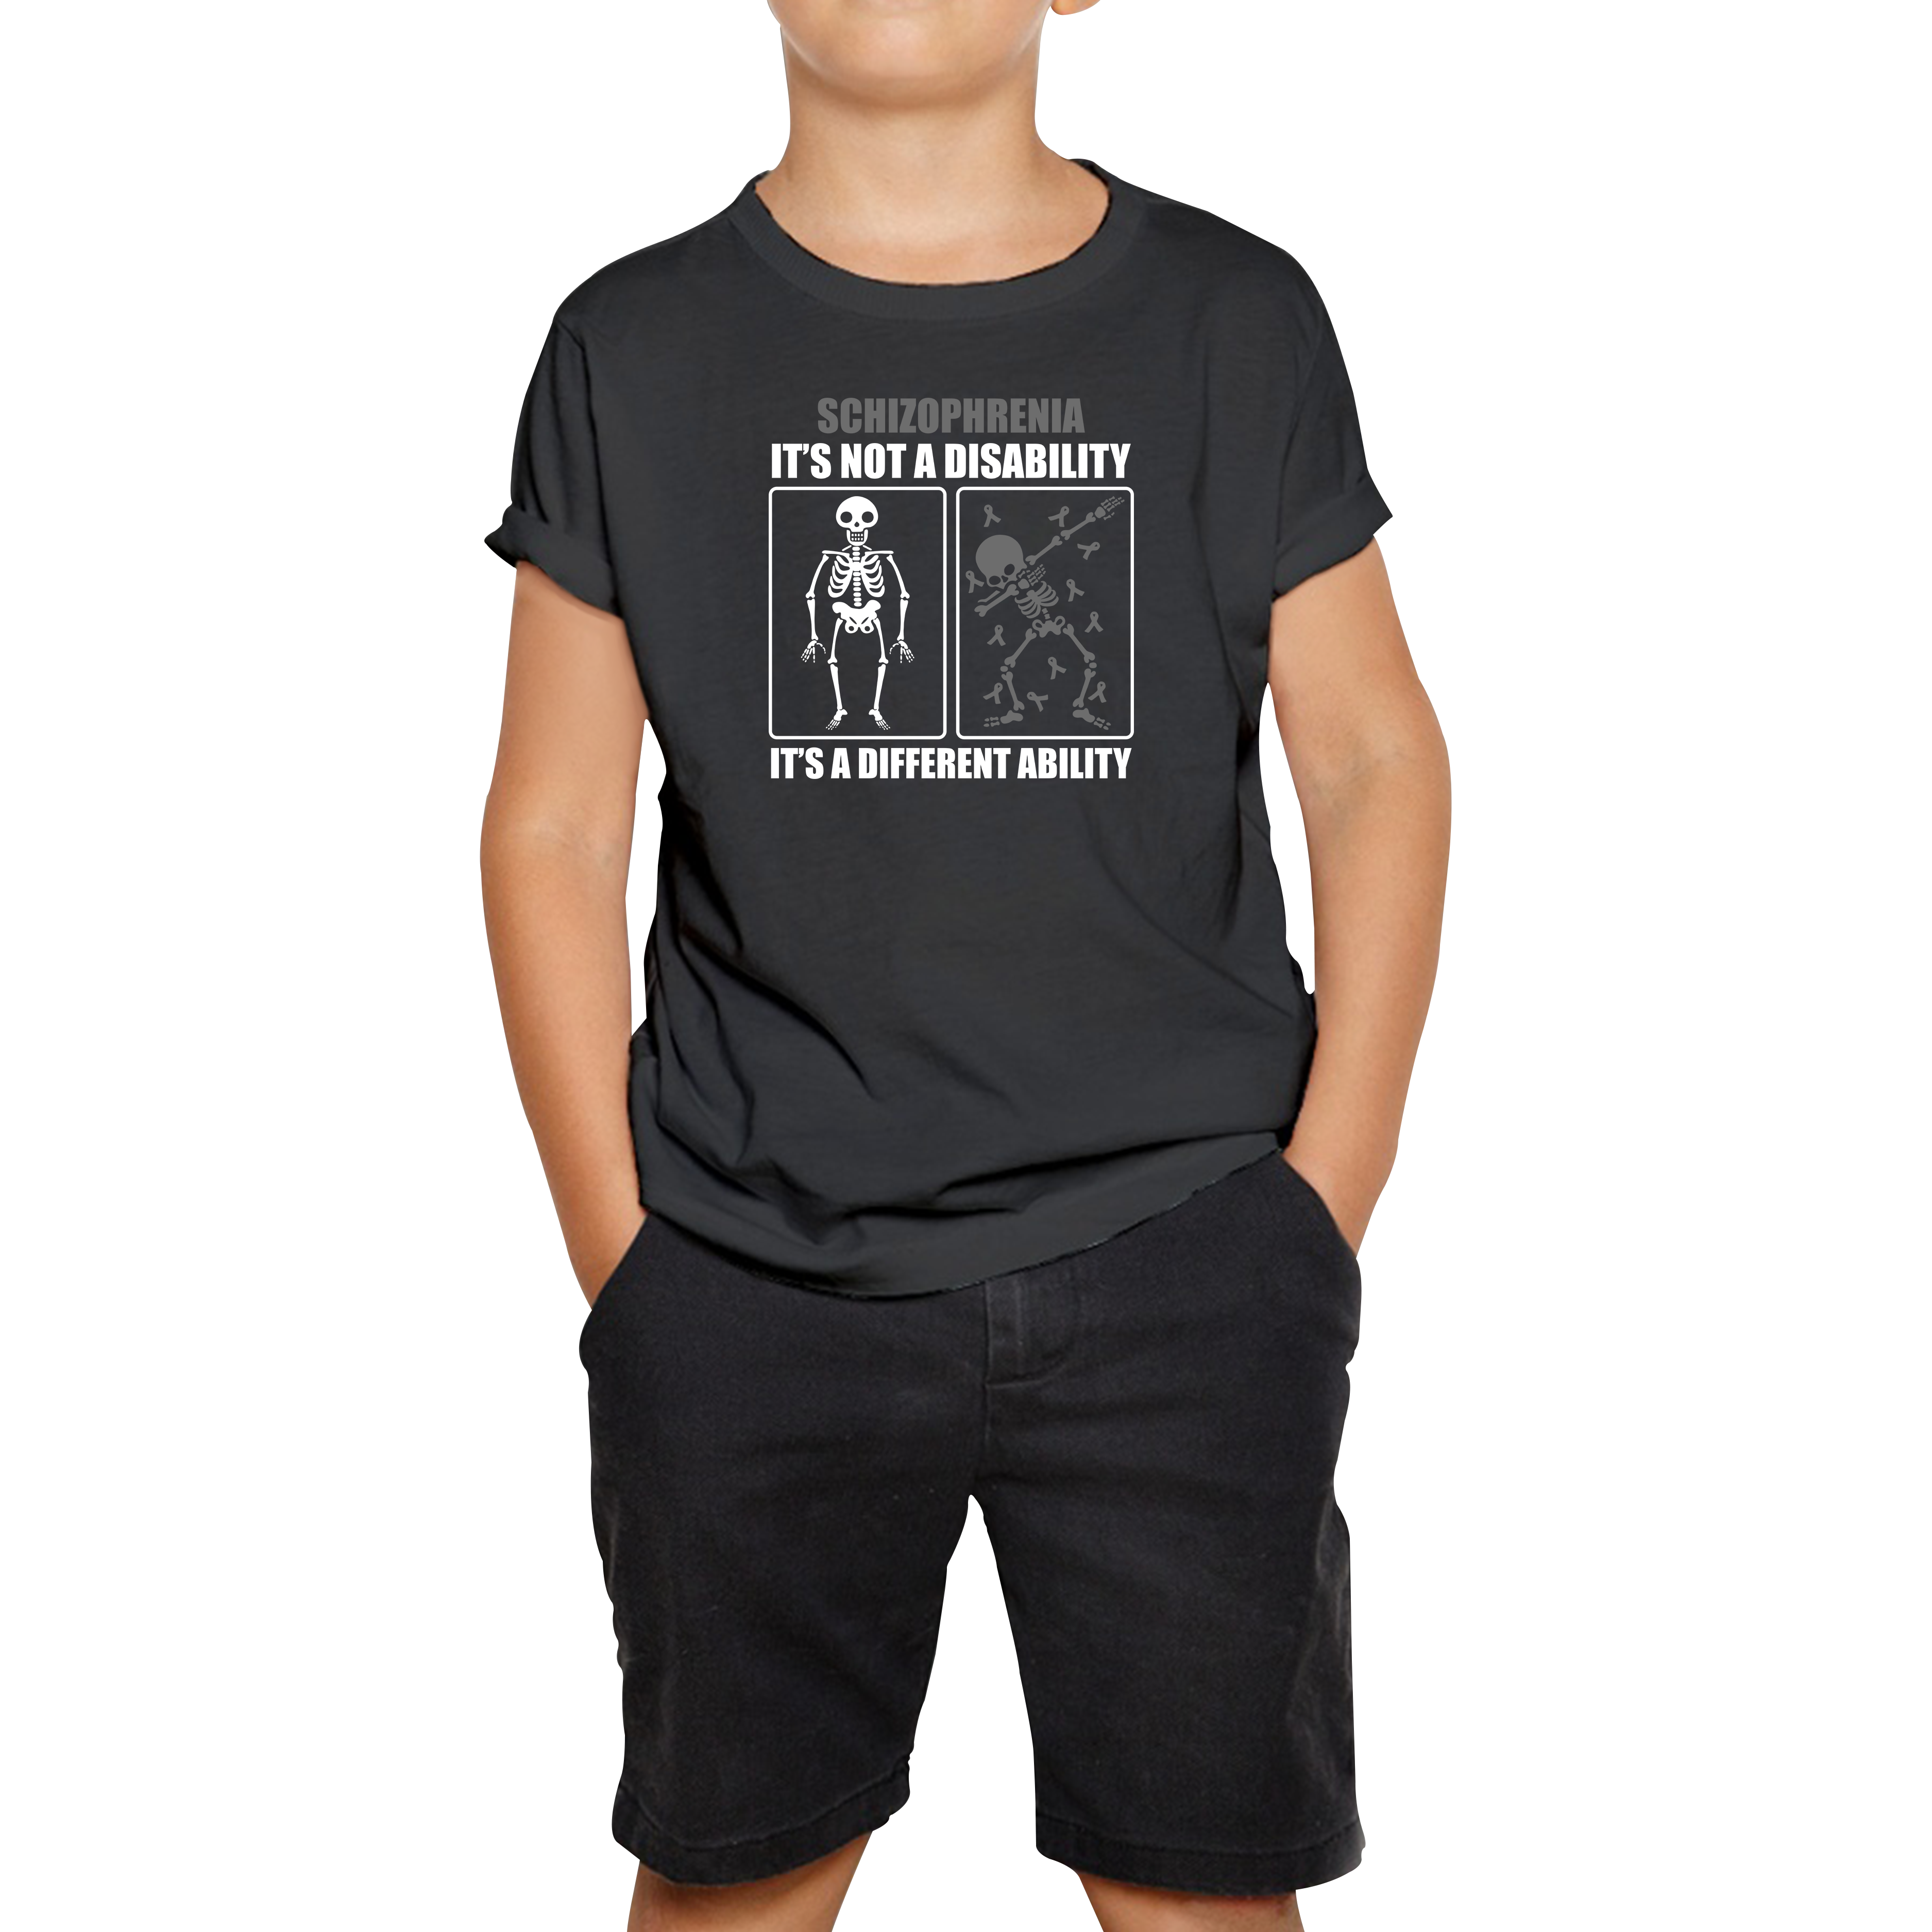 Schizophrenia It's Not A Disability It's A Different Ability Skull Dab Dancing Funny Joke Kids T Shirt